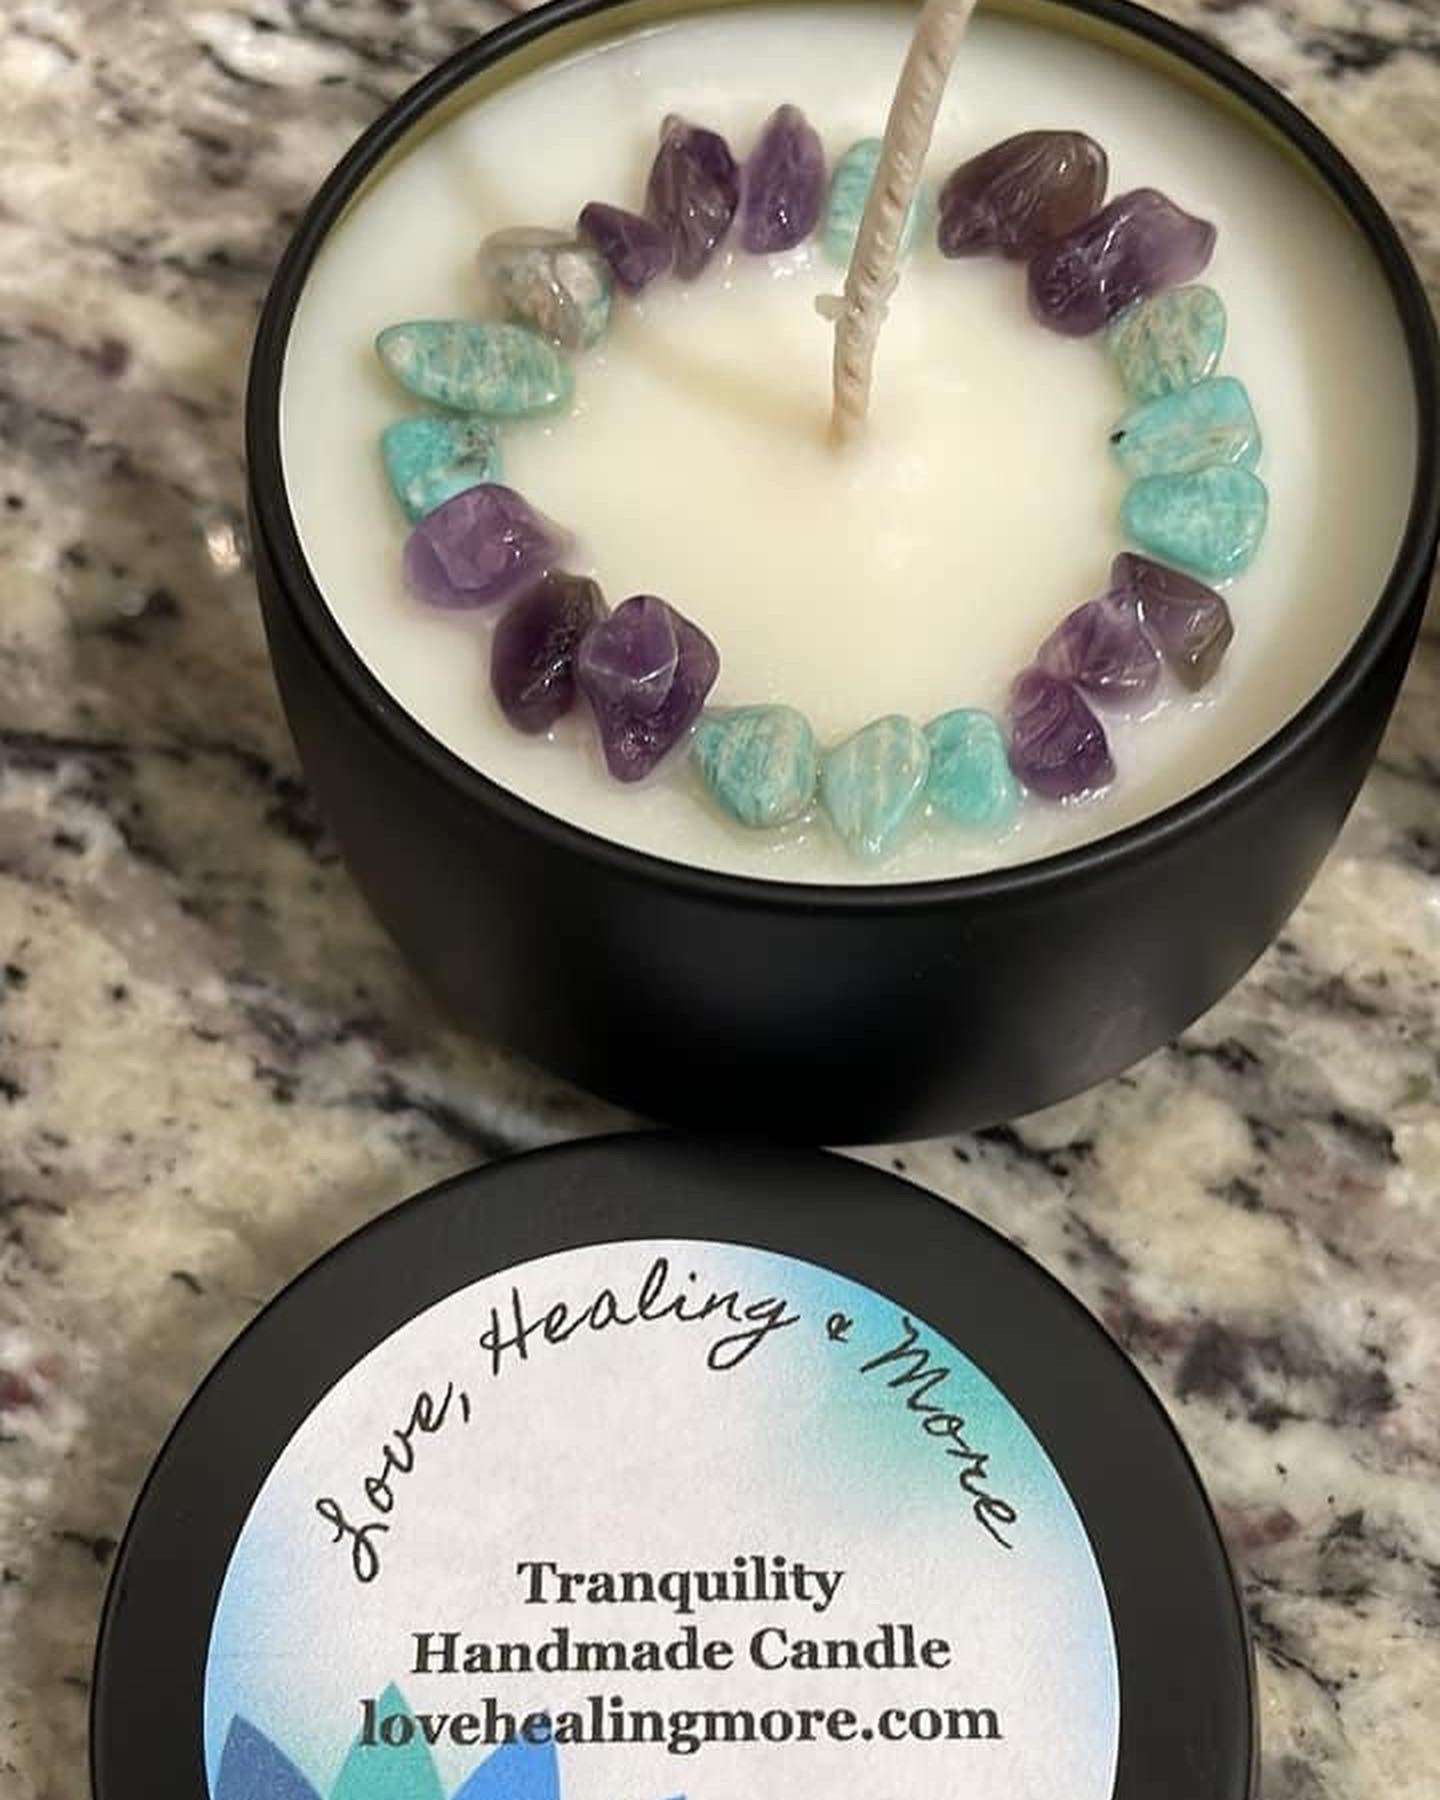 Handmade 4 oz. Reiki Infused Tranquility Fragrance Candle